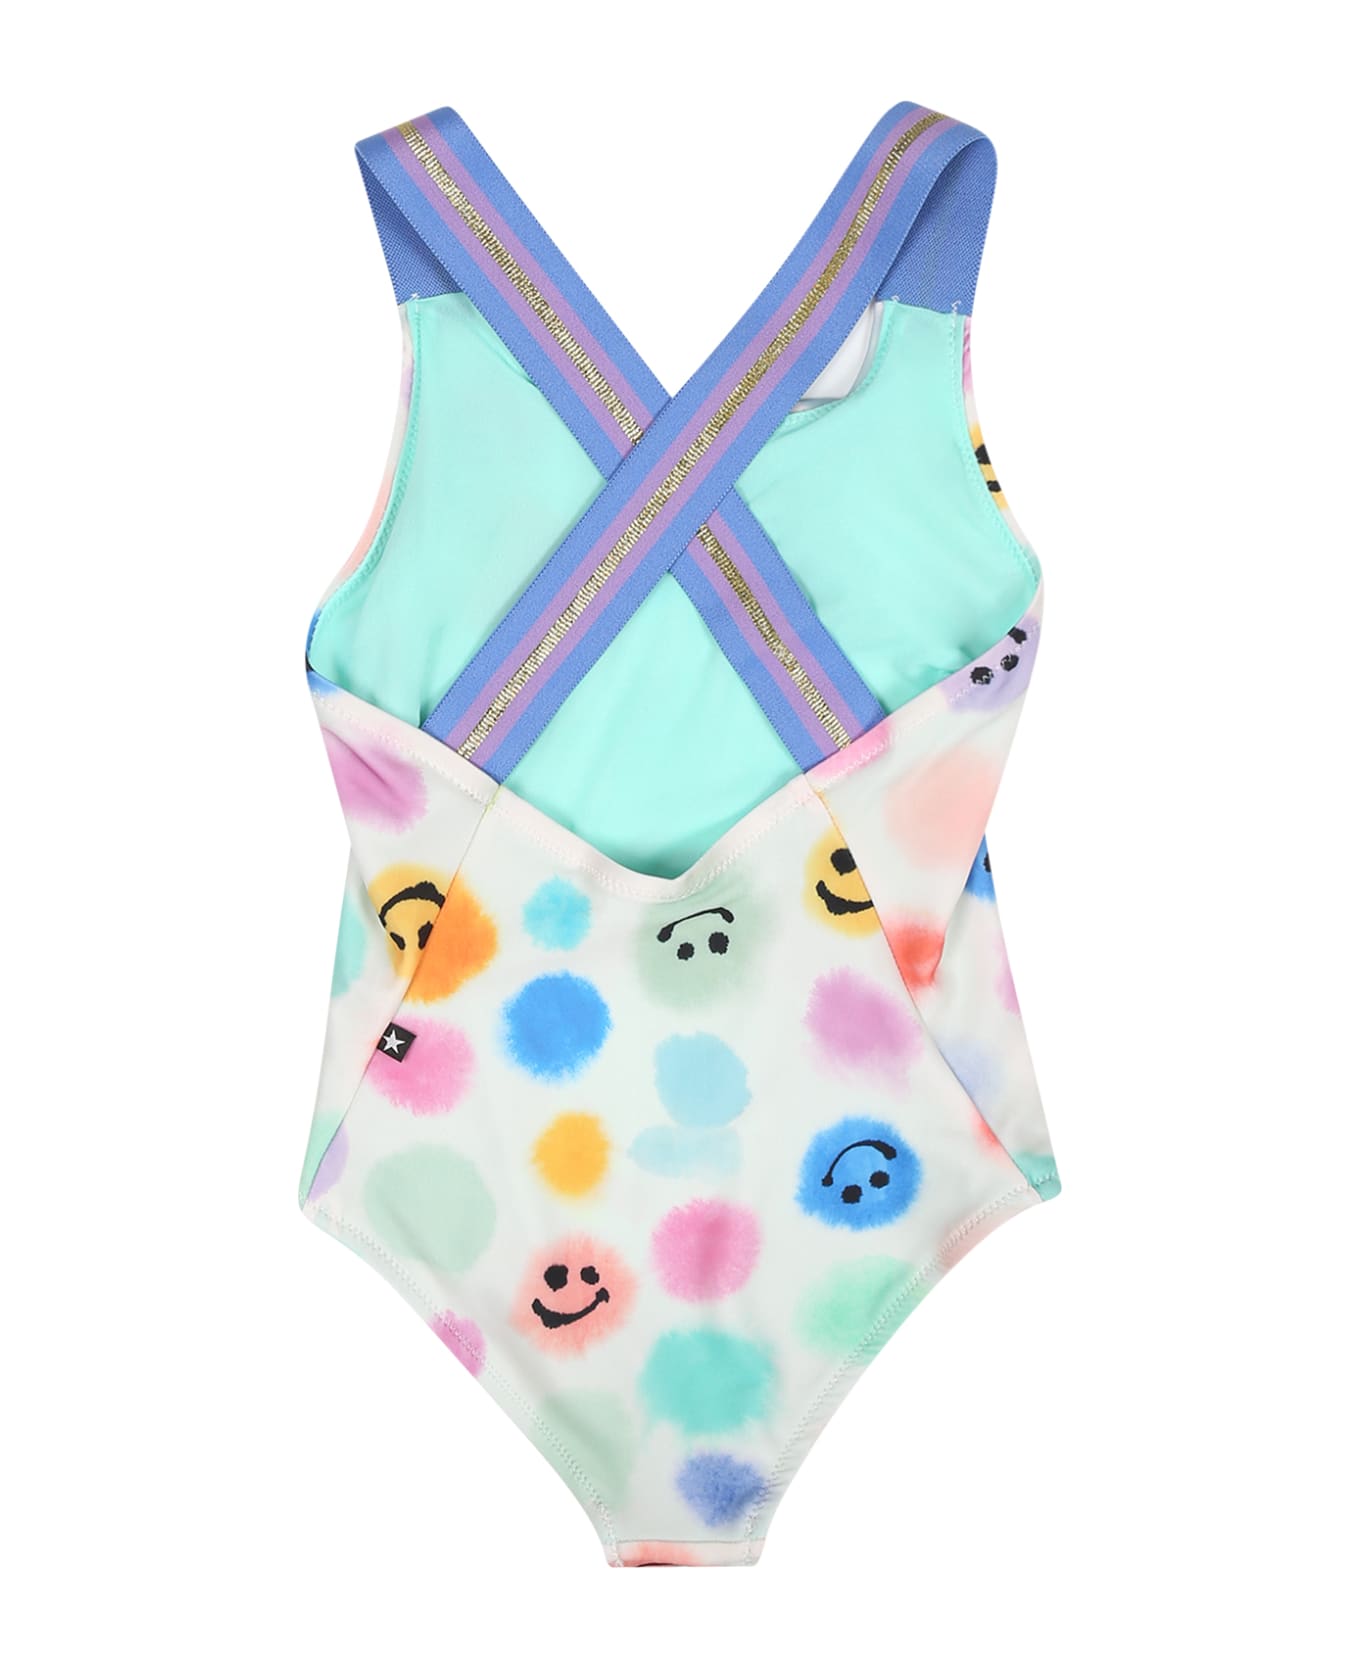 Molo White Swimsuit For Baby Girl With Polka Dots And Smiley - Multicolor